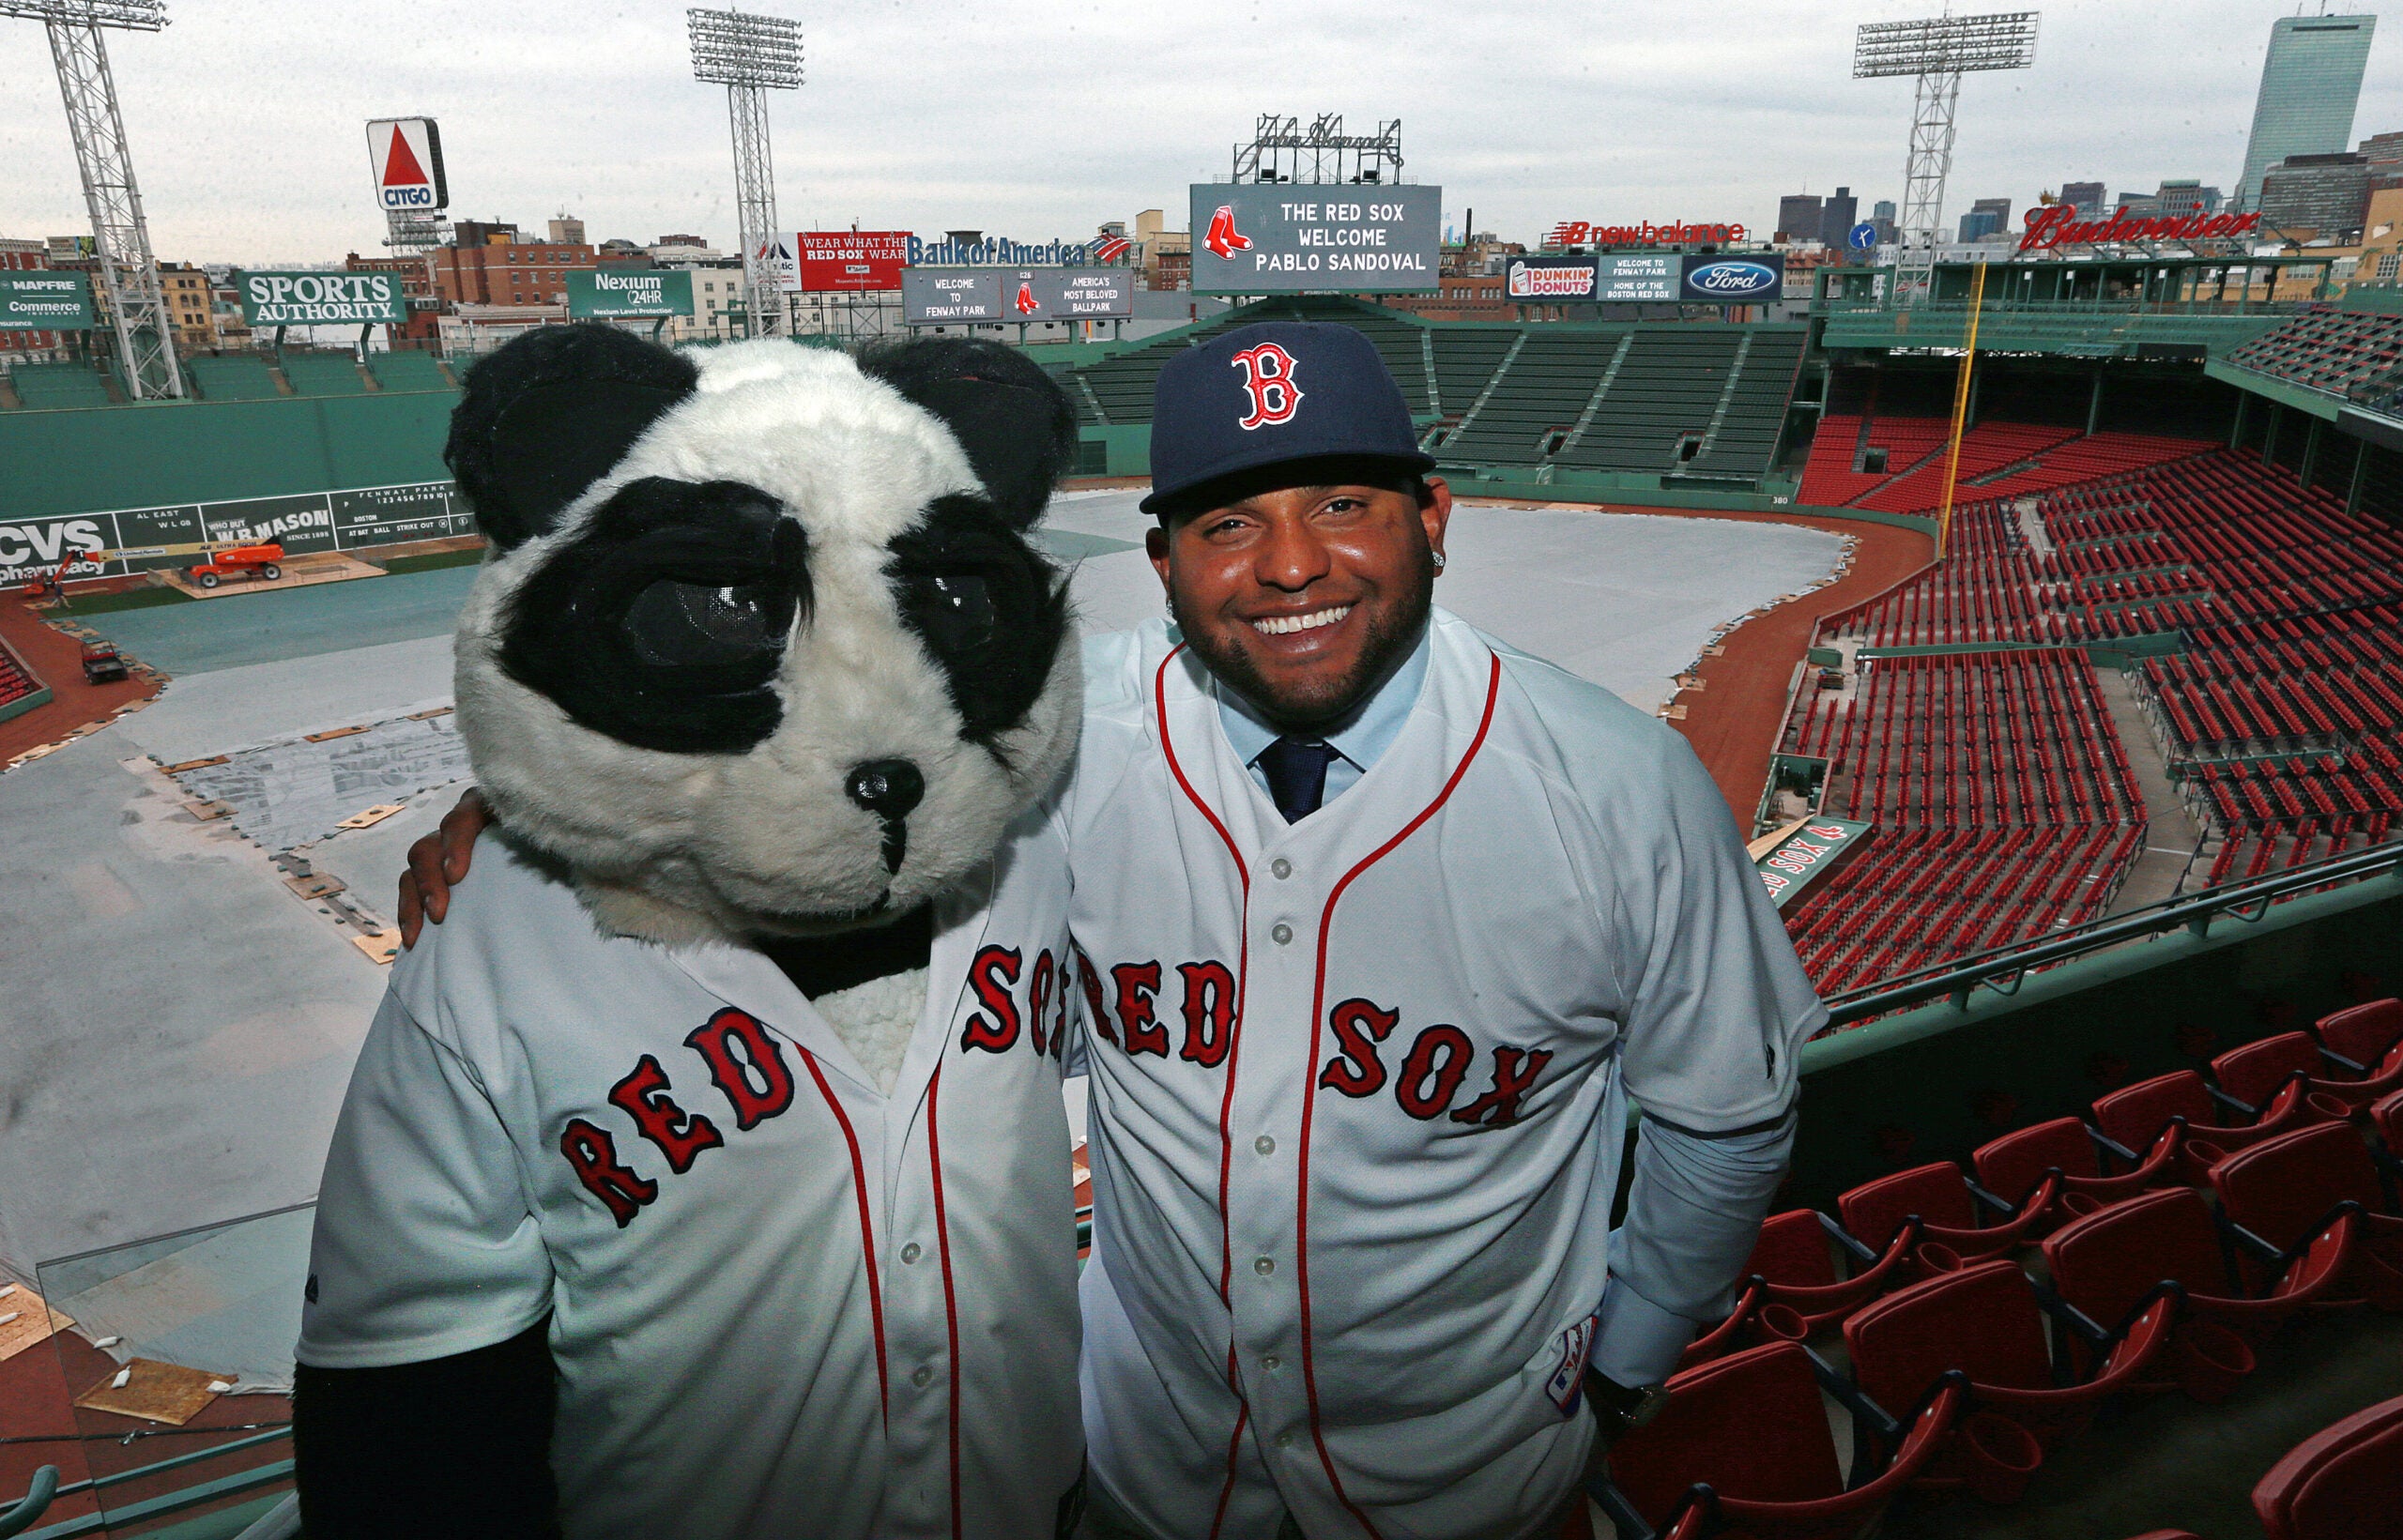 Pablo Sandoval regrets joining the Red Sox and leaving the Giants in 2014